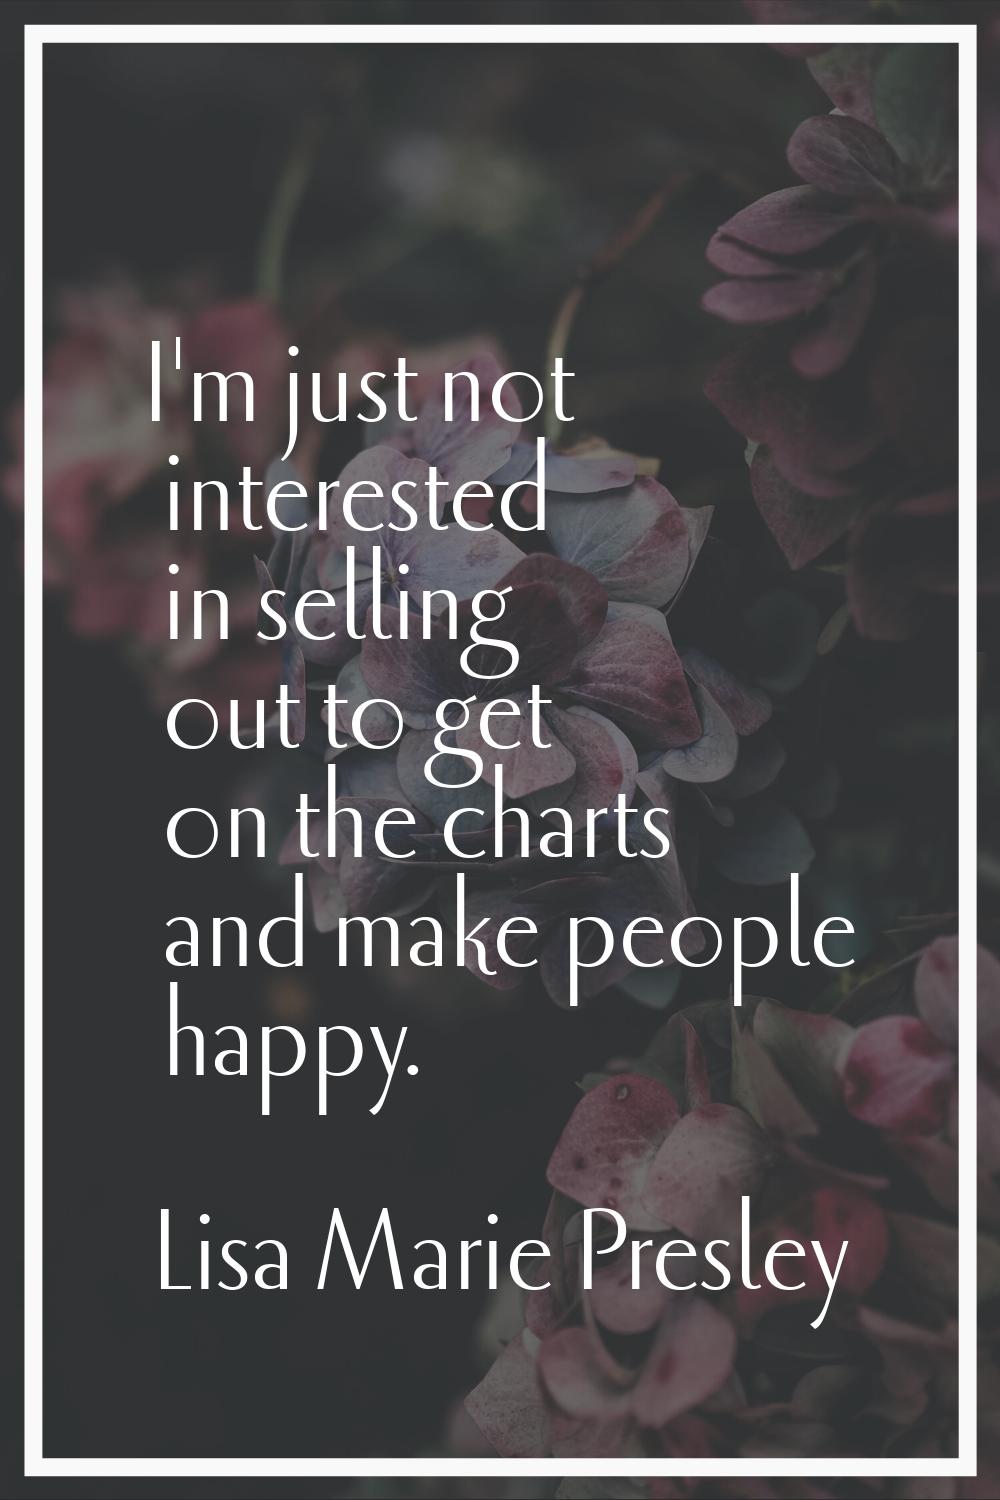 I'm just not interested in selling out to get on the charts and make people happy.